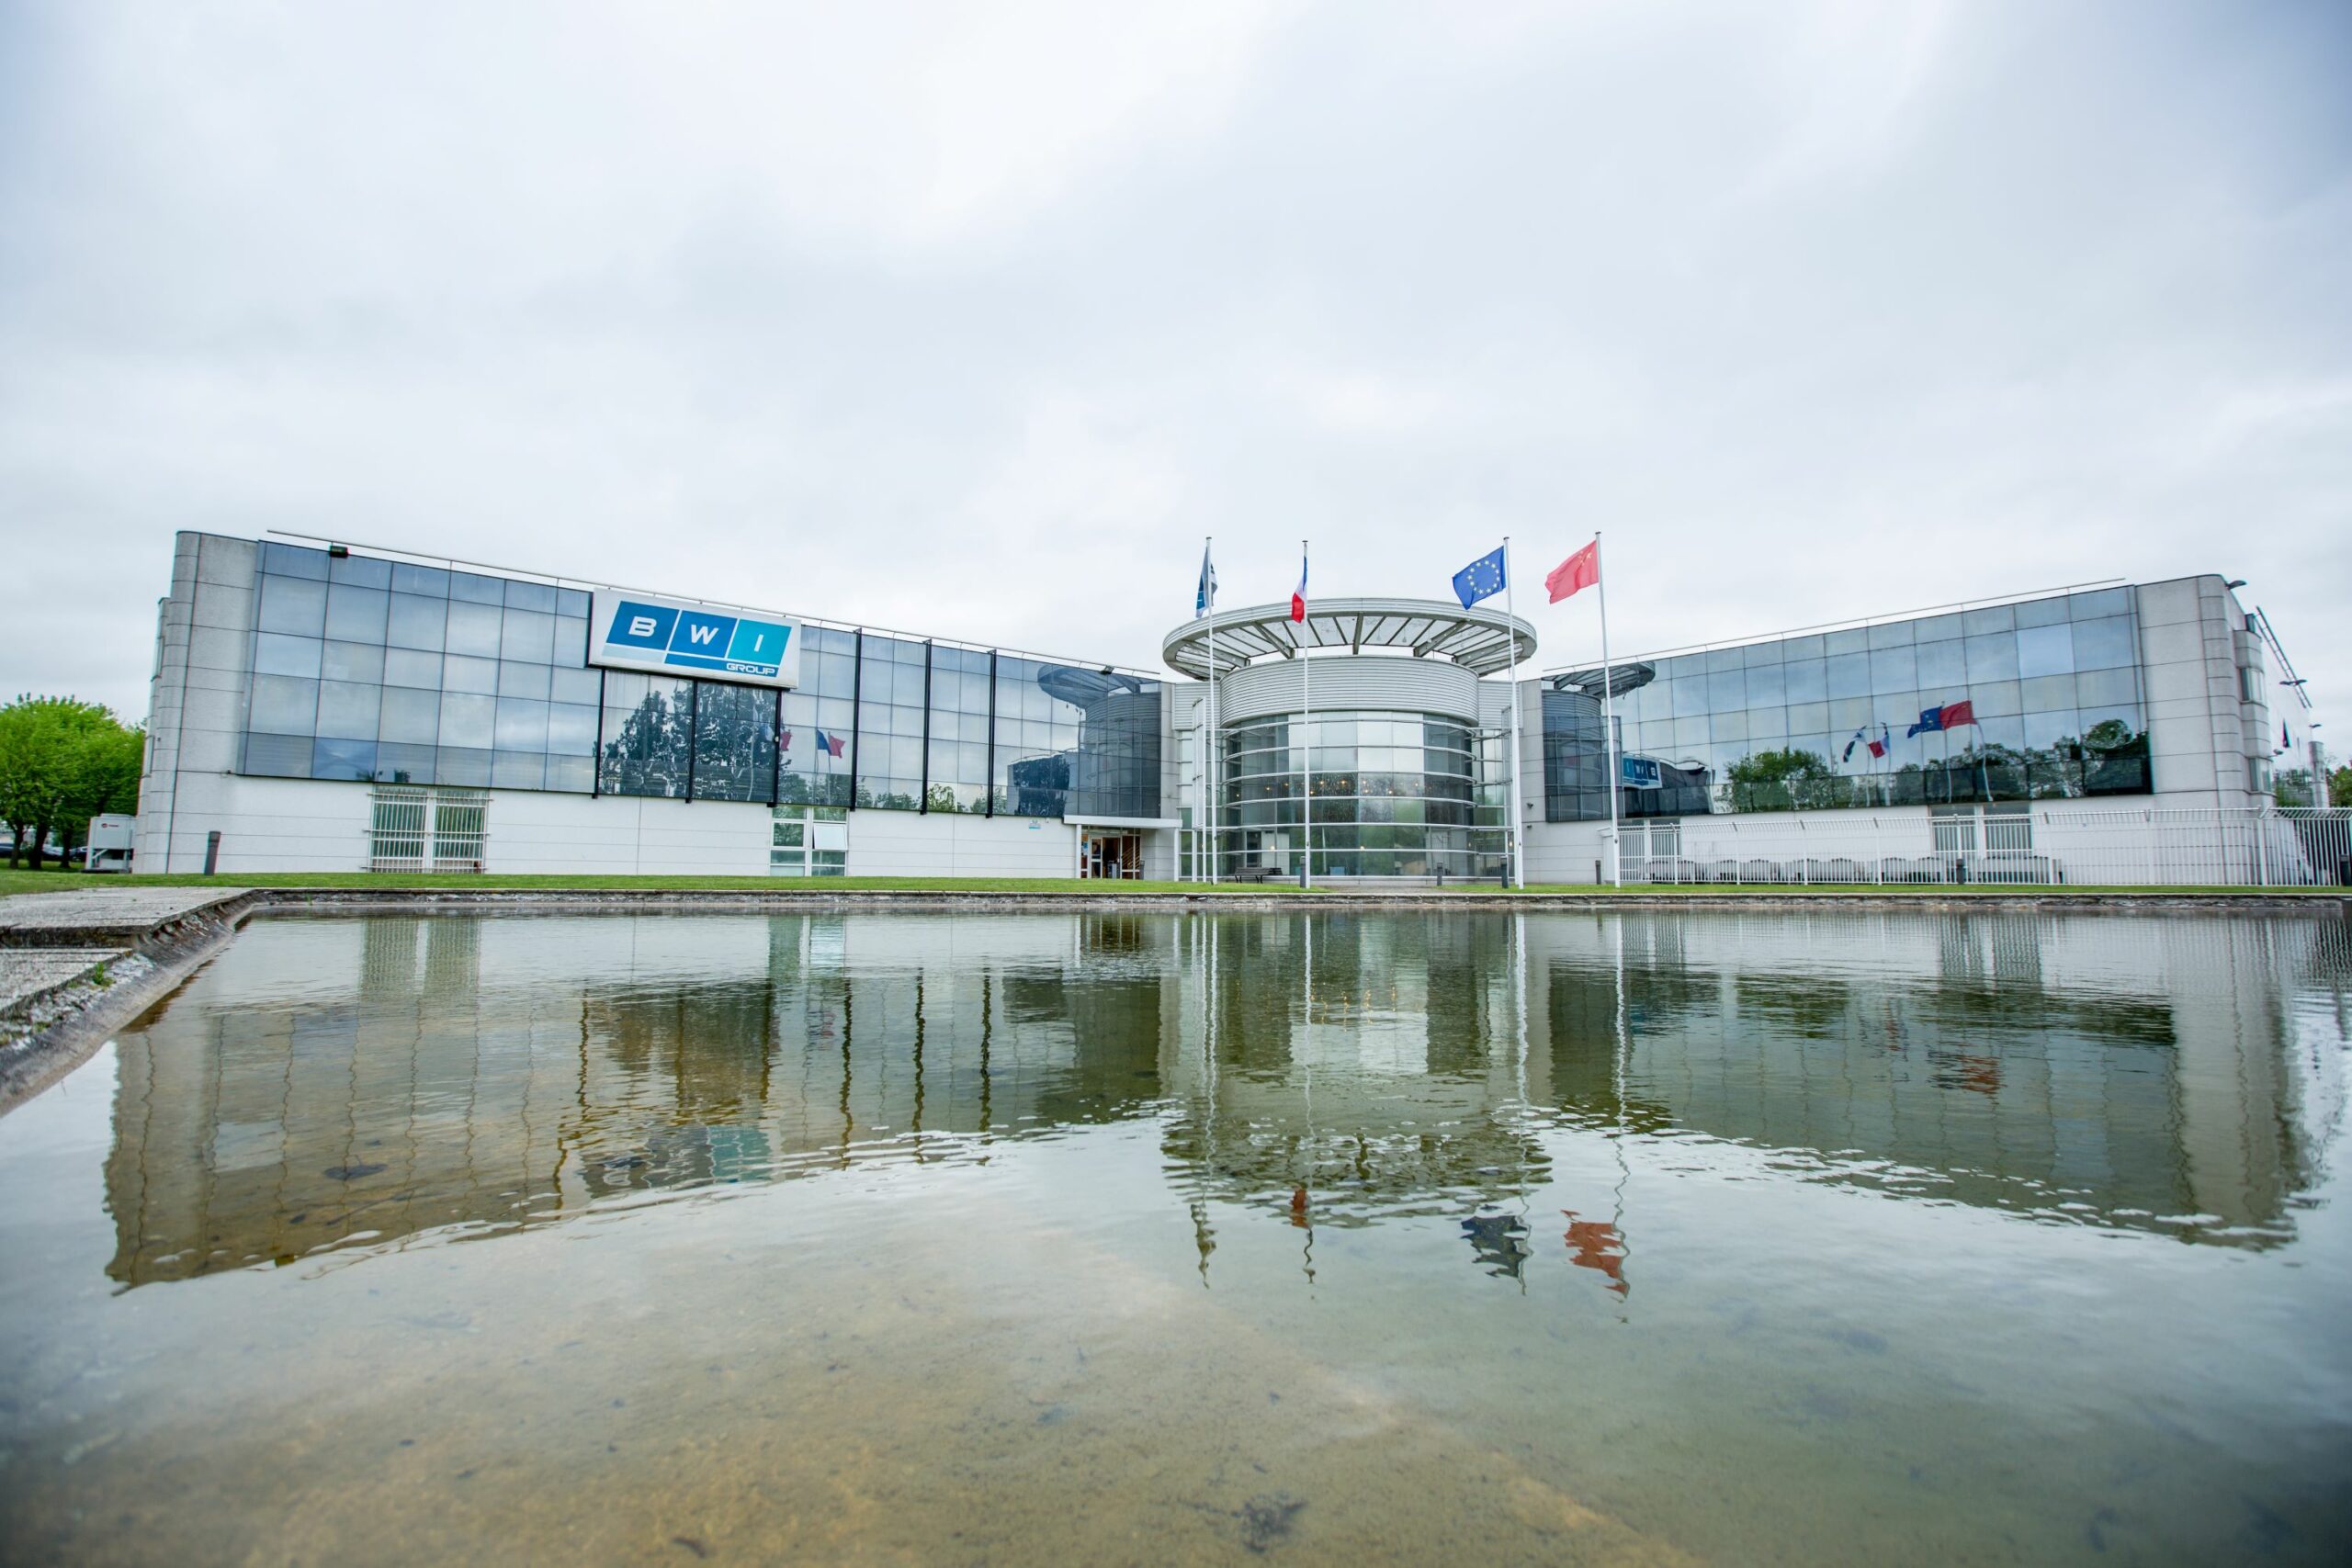 BWI Group's technology center in Paris has been using more than 700 MWh of clean energy per year to power its equipment